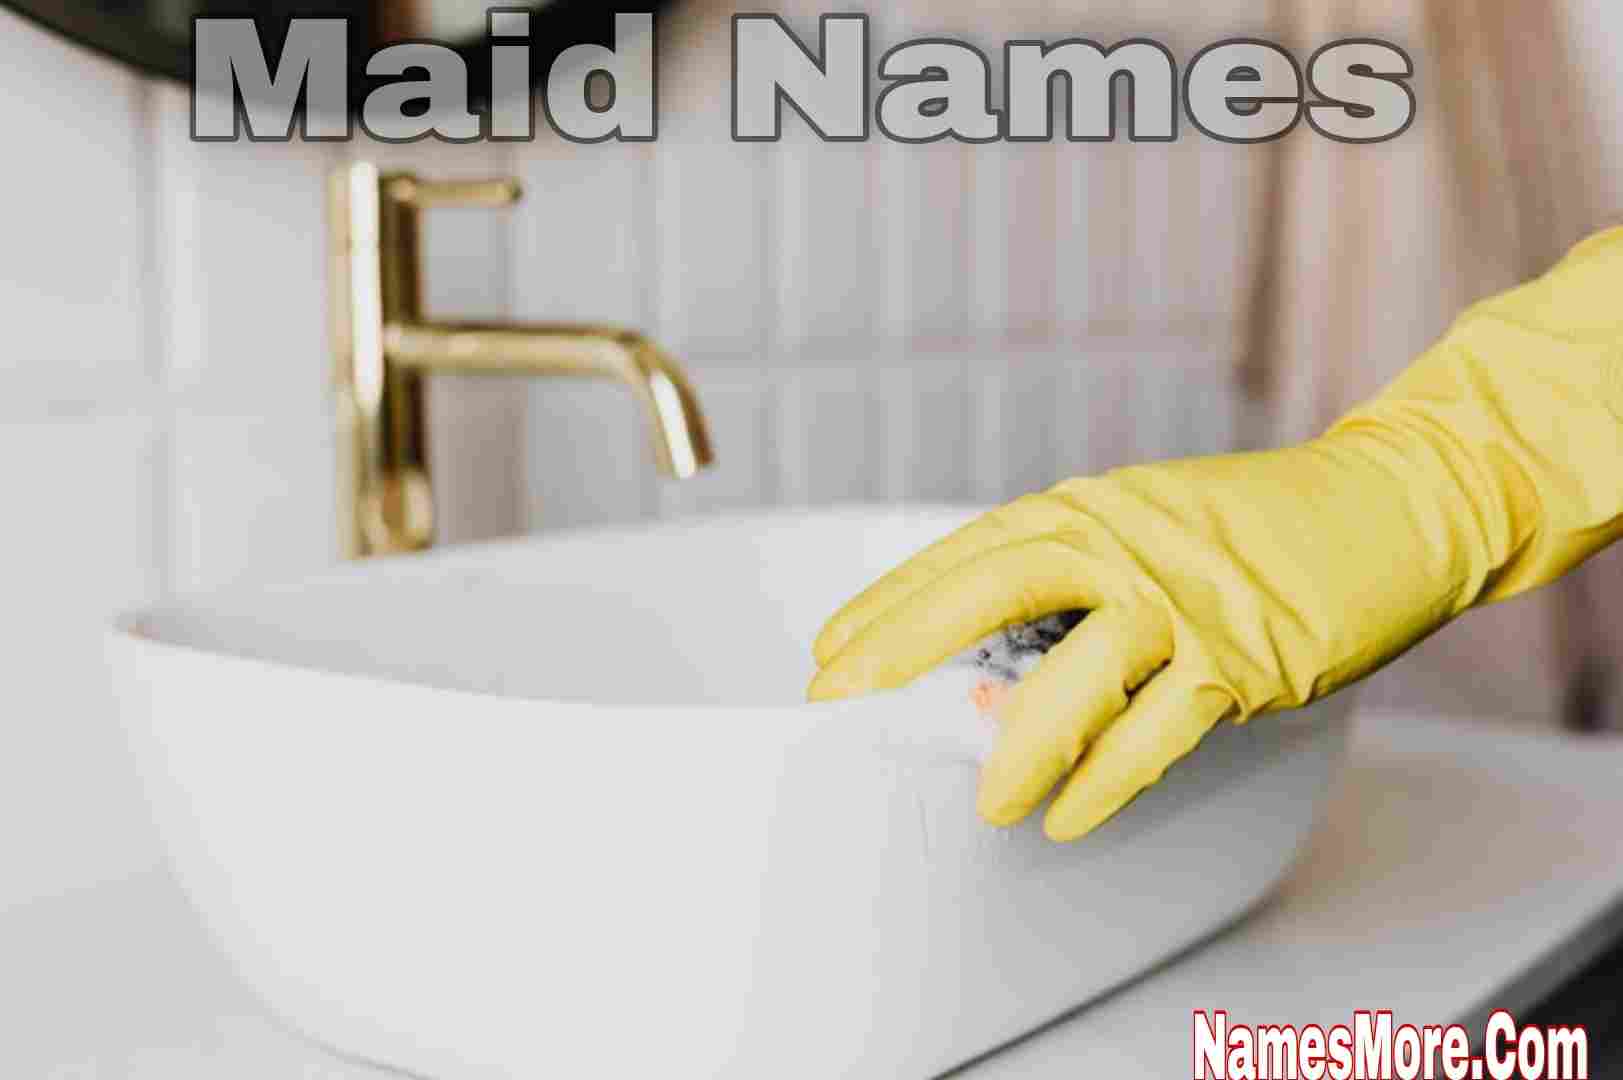 Featured Image for 900+ Maid Names [Best And Famous]